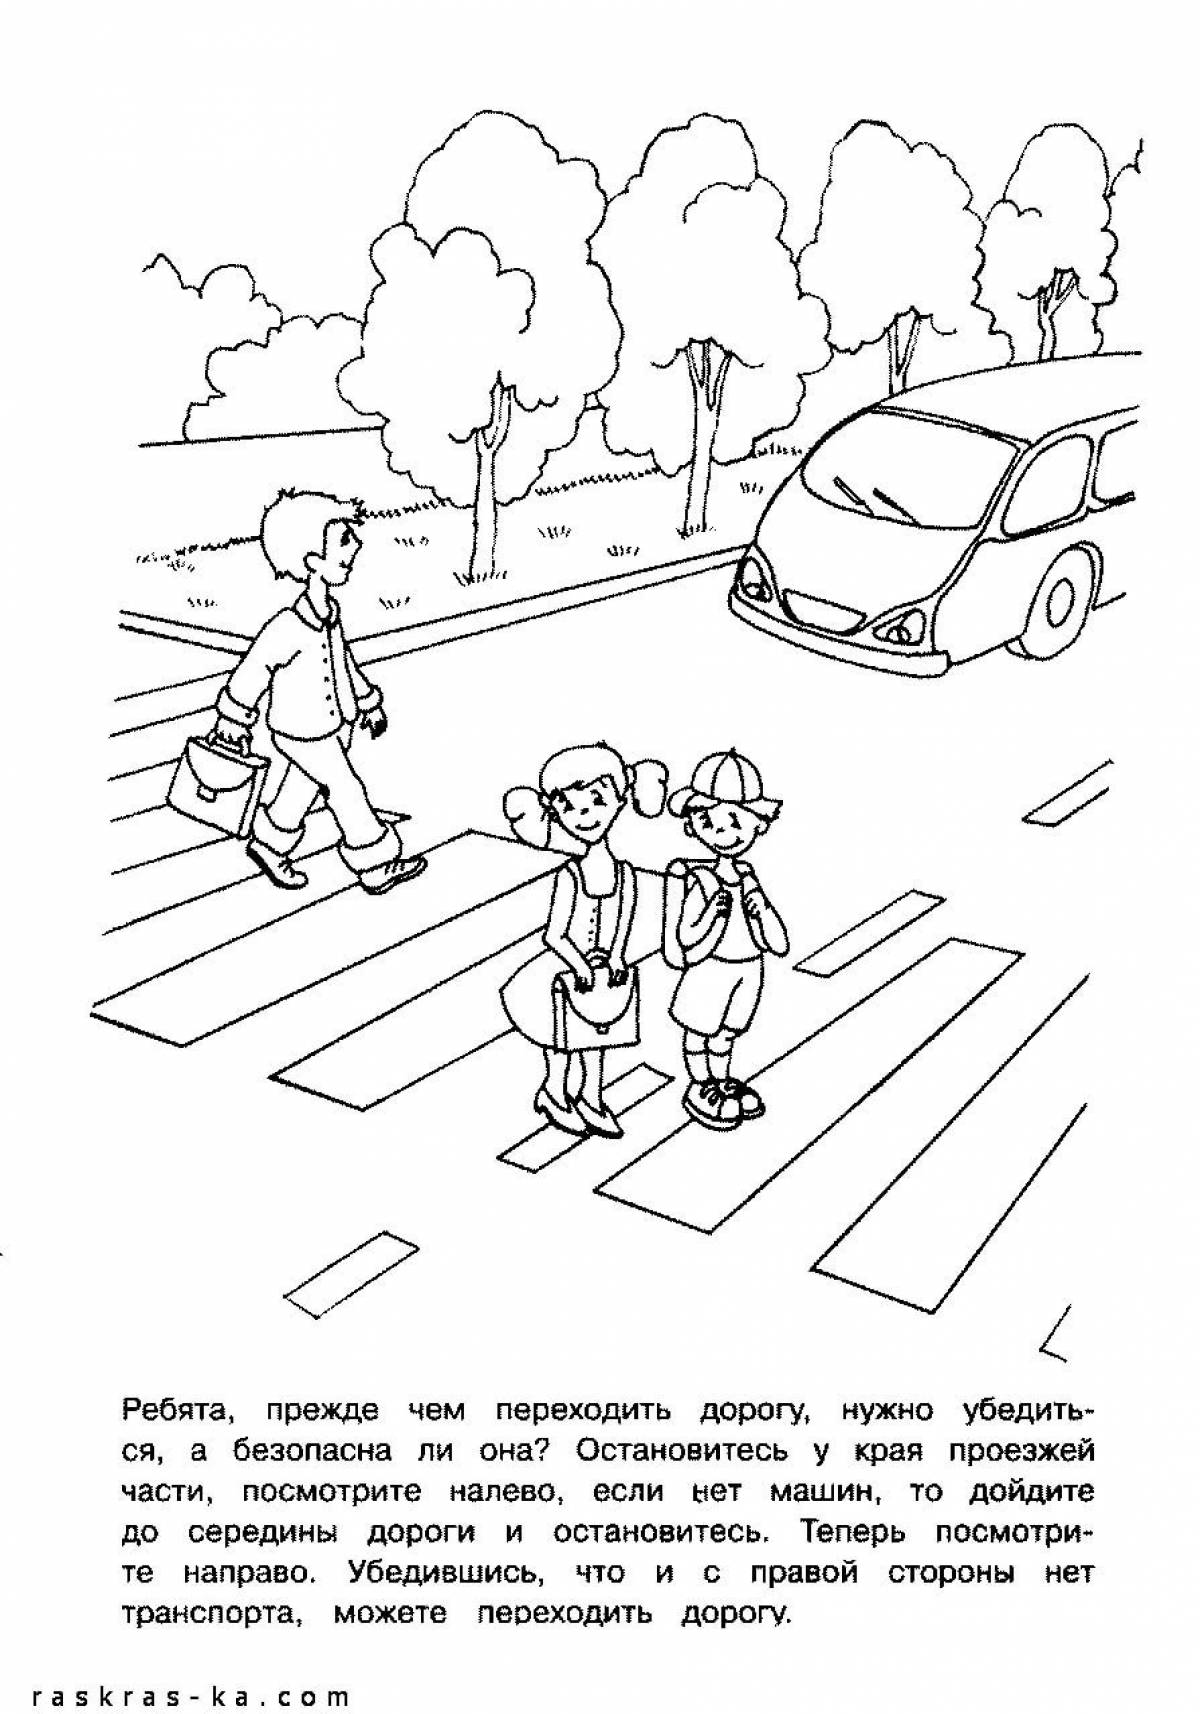 Rules of the road for schoolchildren #15